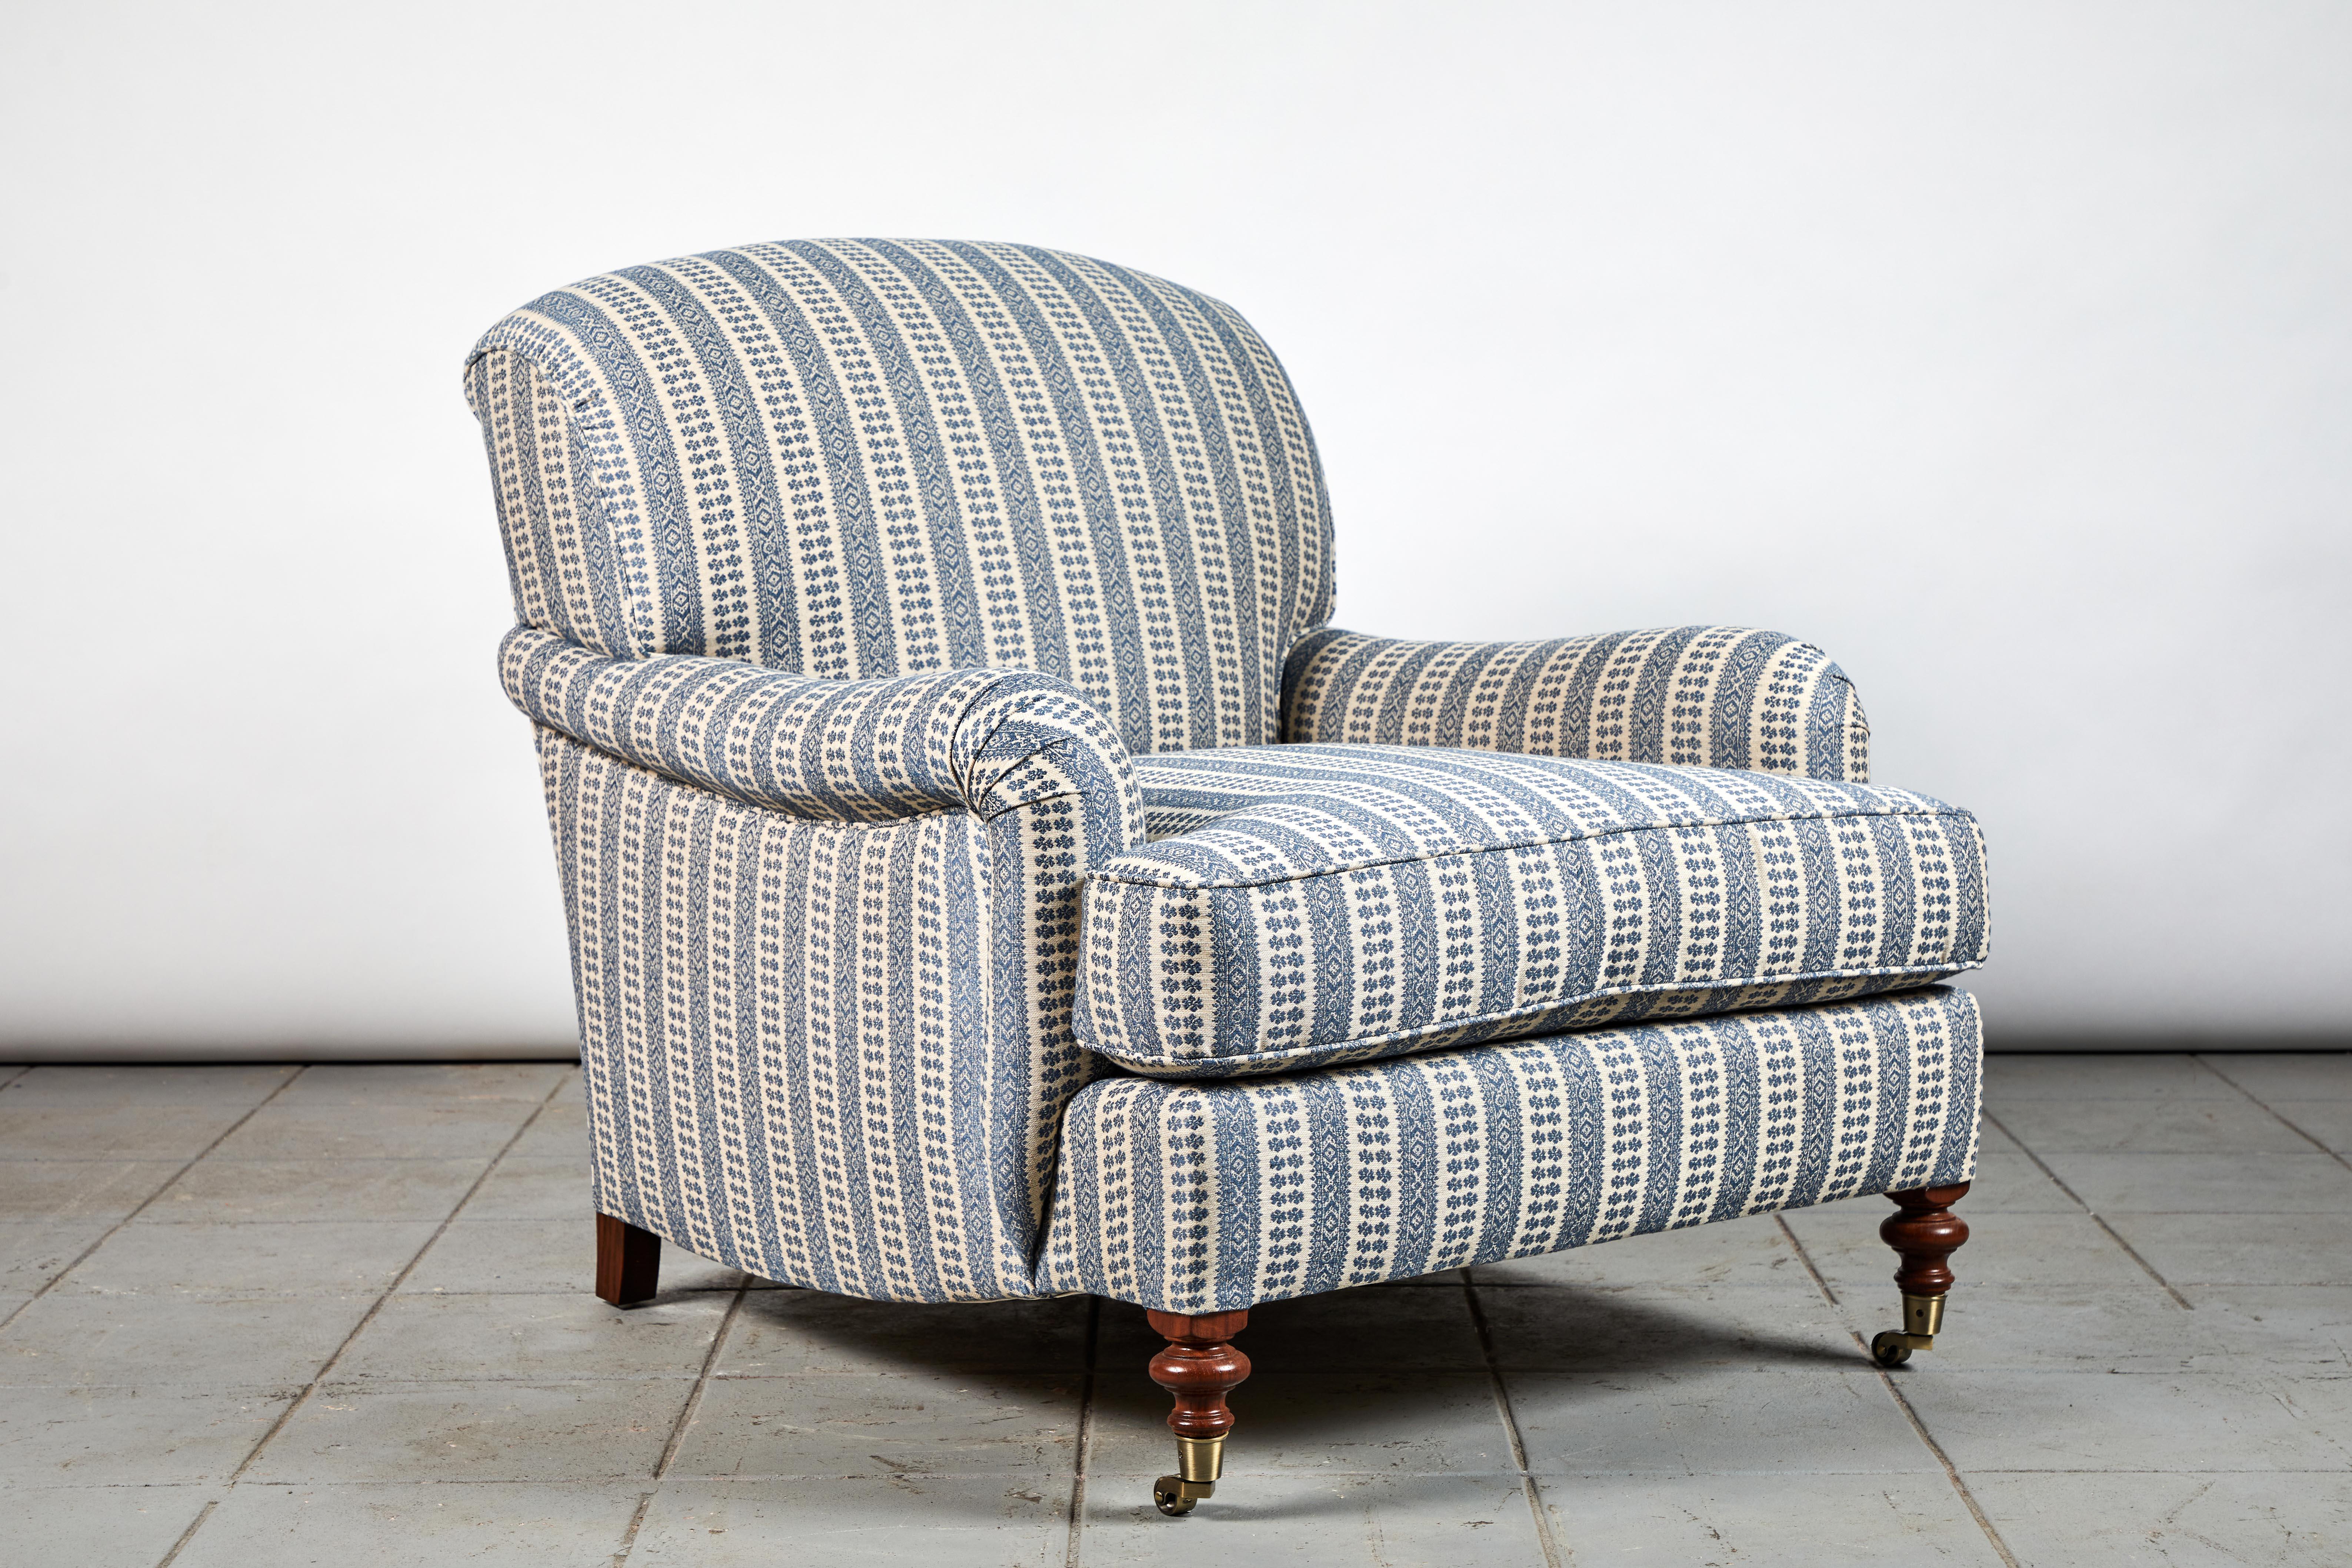 Light a fire, grab your favorite book, curl up in the English roll armchair, and prepare for the coziest rainy day on record.

This English roll armchair is beautifully upholstered in a Susan Deliss Fabric, the legs are finished in oak stained